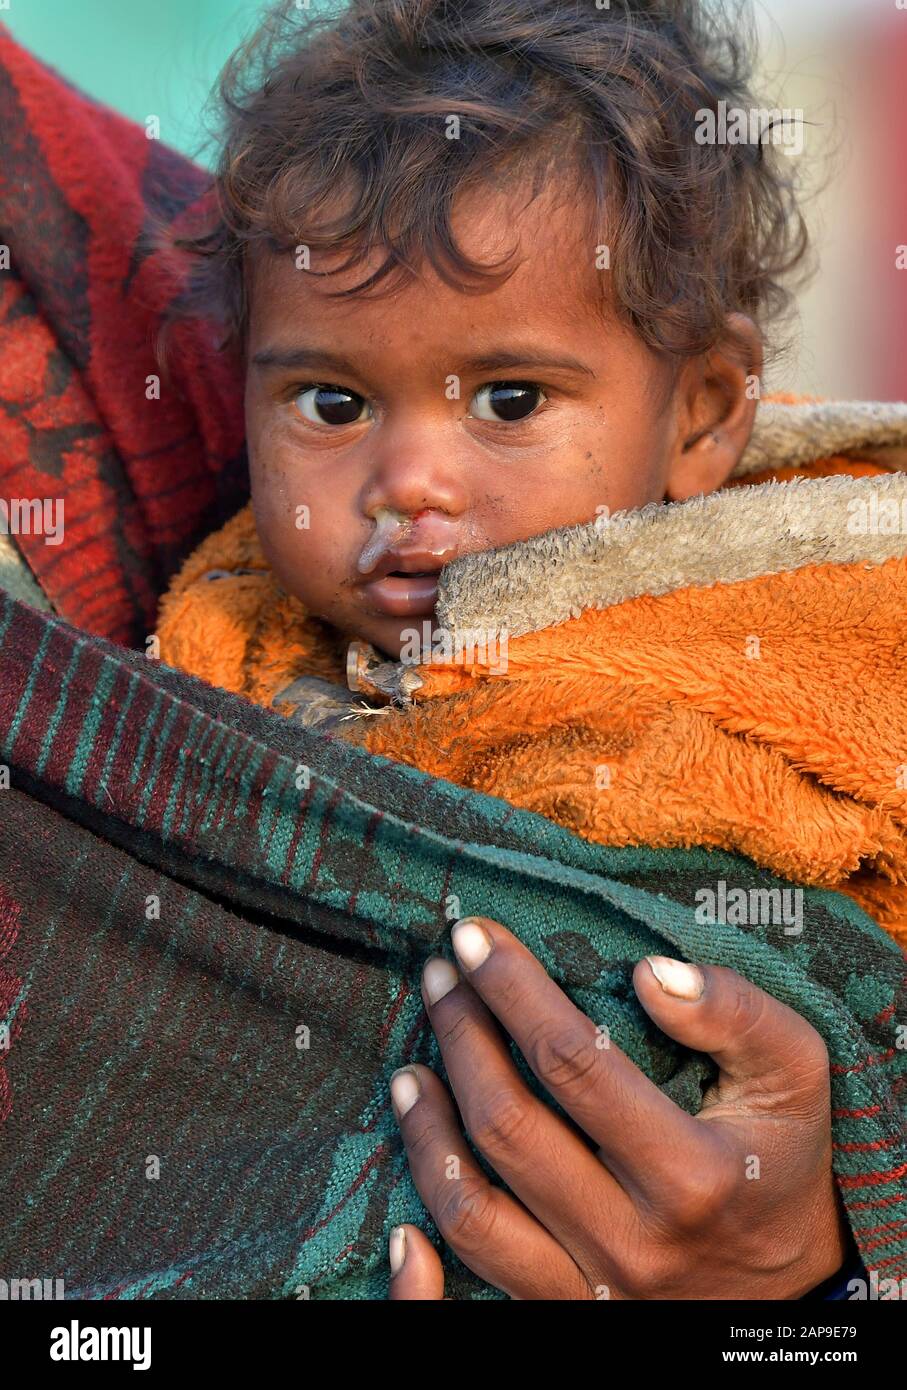 Close up mucus flowing from nose, Indian child has a runny nose with Yellow snot.Unhygienic Poor boy with snotty nose and child has a cold or the flu Stock Photo